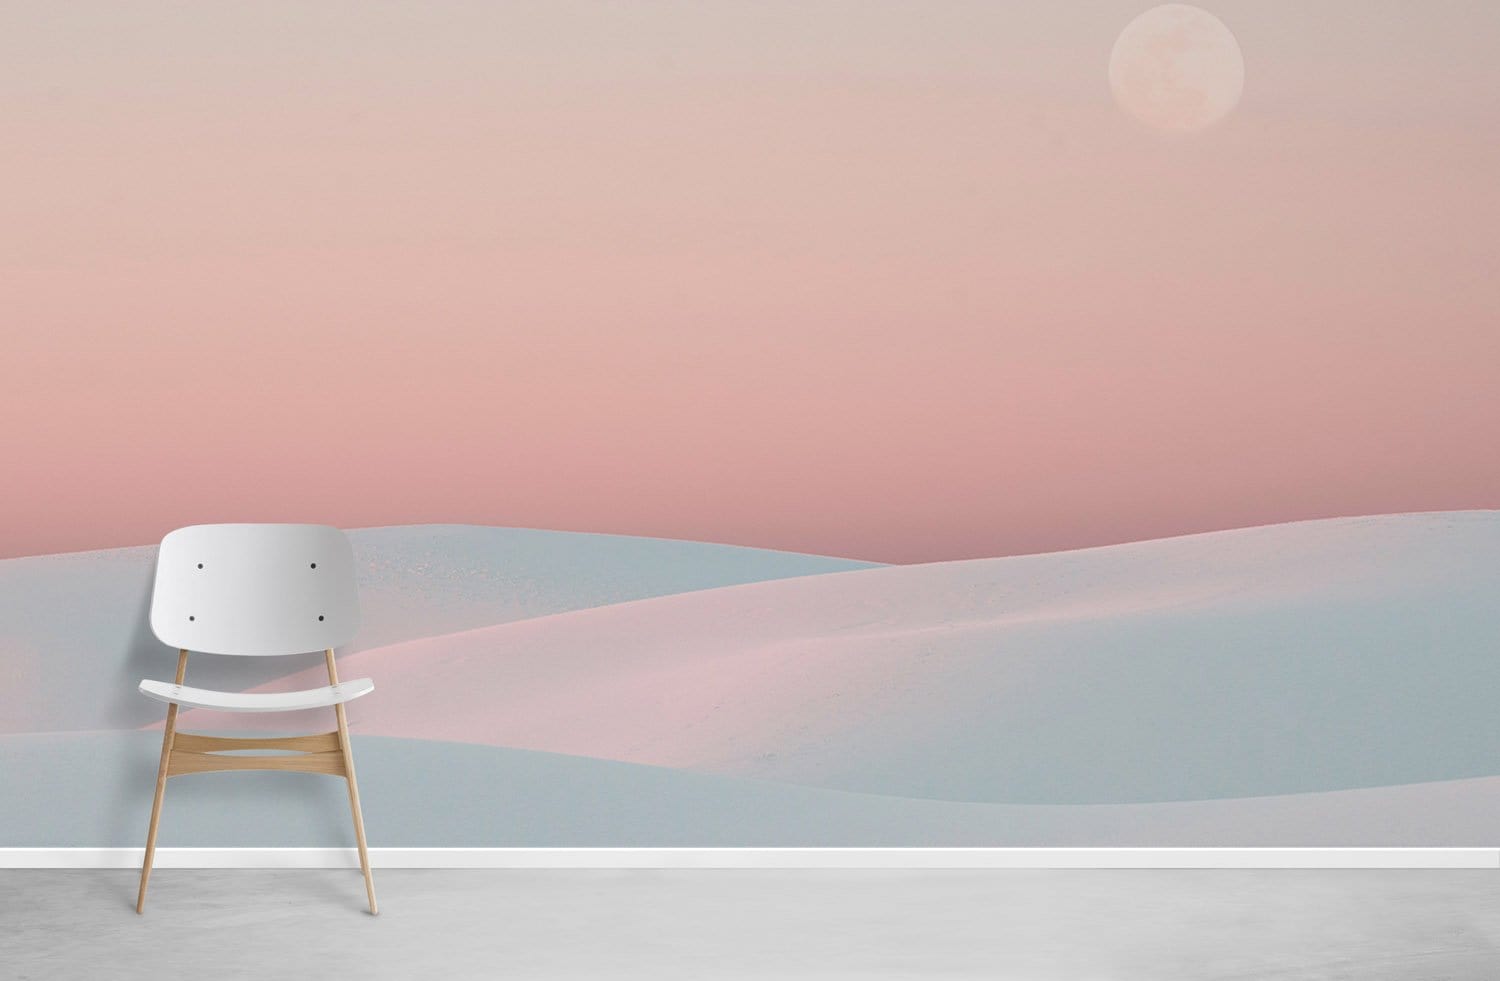 Wallpaper mural with a pink desert landscape, perfect for use as home decor.